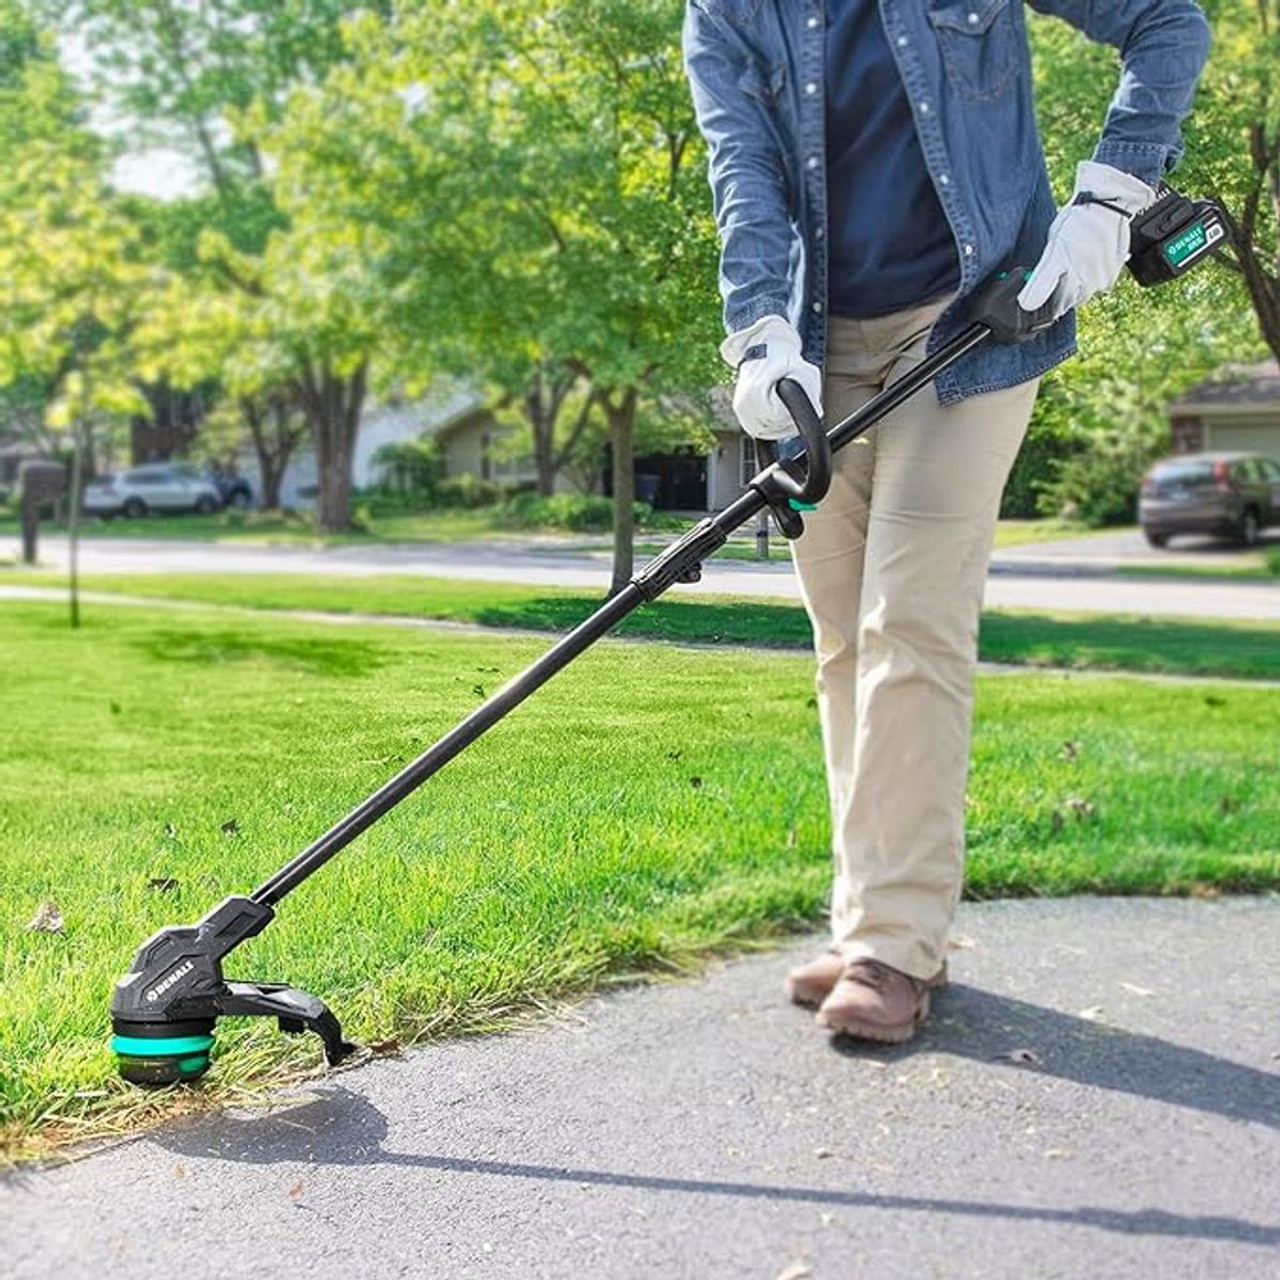 Denali by SKIL™ 20V Brushless 13-Inch String Trimmer Kit with 4.0Ah Battery product image